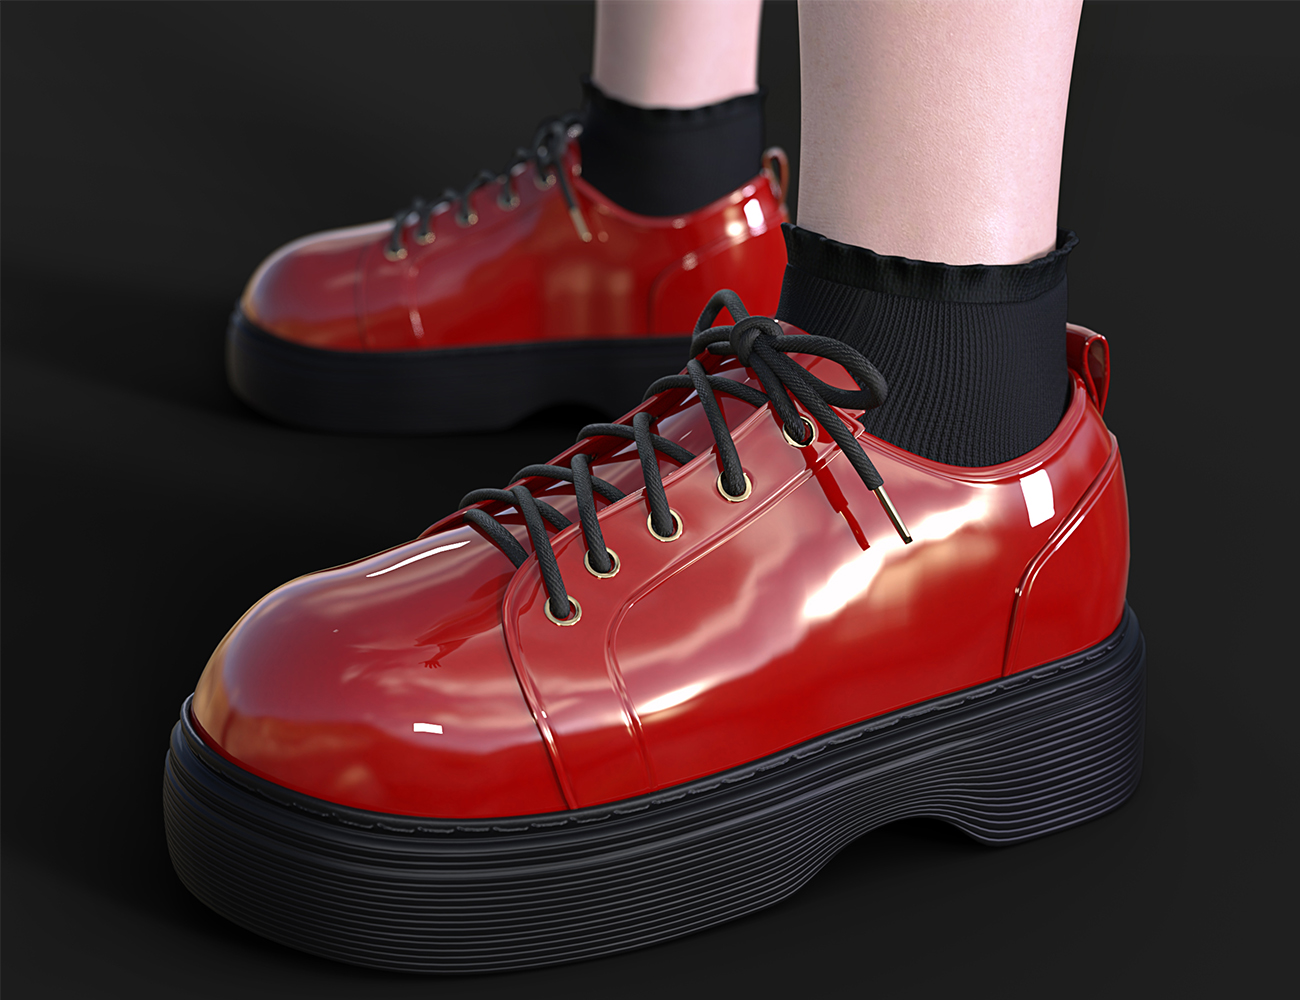 SU Round Toe Shoes for Genesis 8 and 8.1 Females by: Sue Yee, 3D Models by Daz 3D